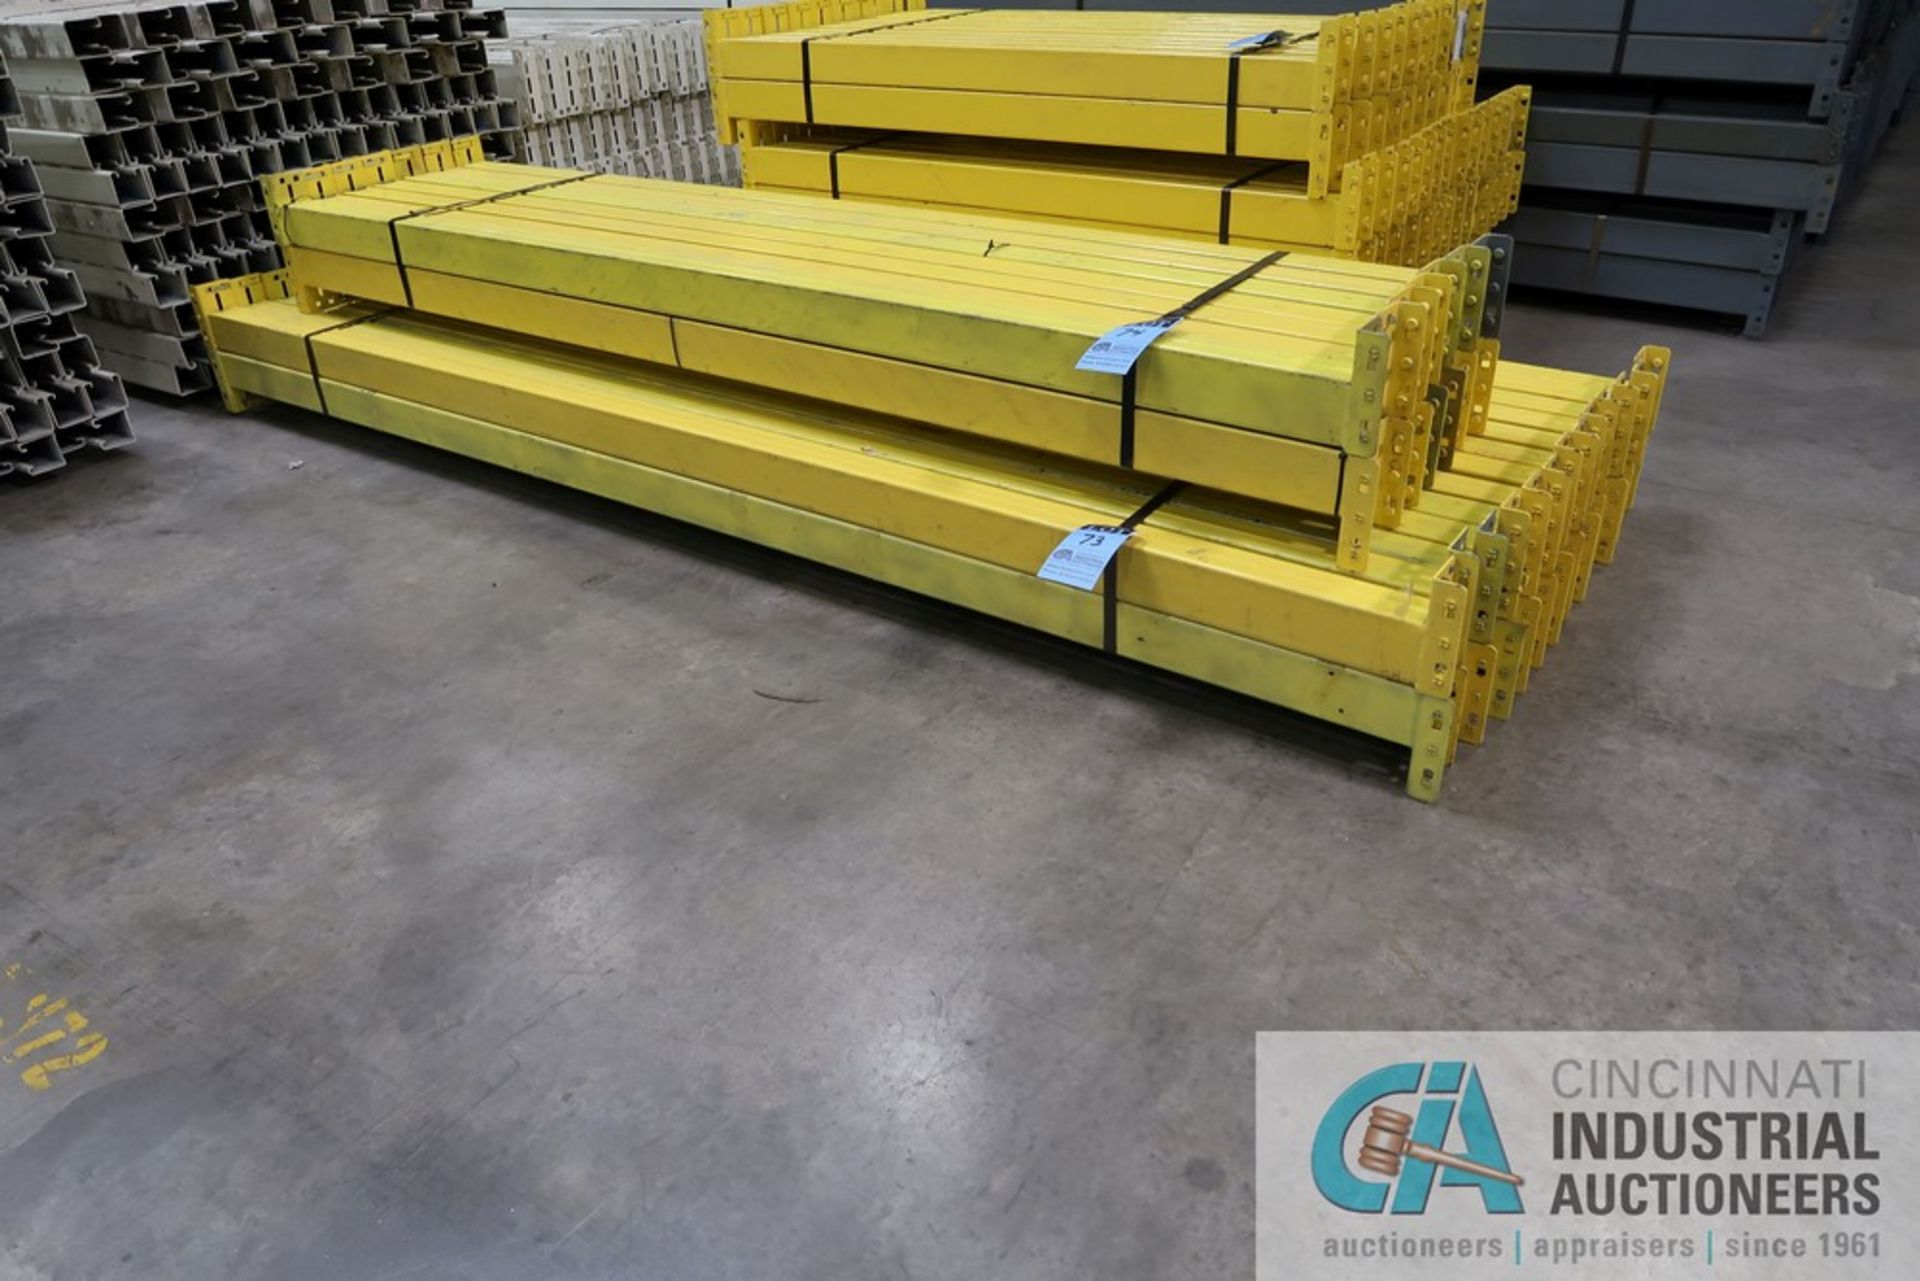 110" X 3.5" TEARDROP PALLET RACK BEAMS - Bid price is per unit multiplied by the quantity **For